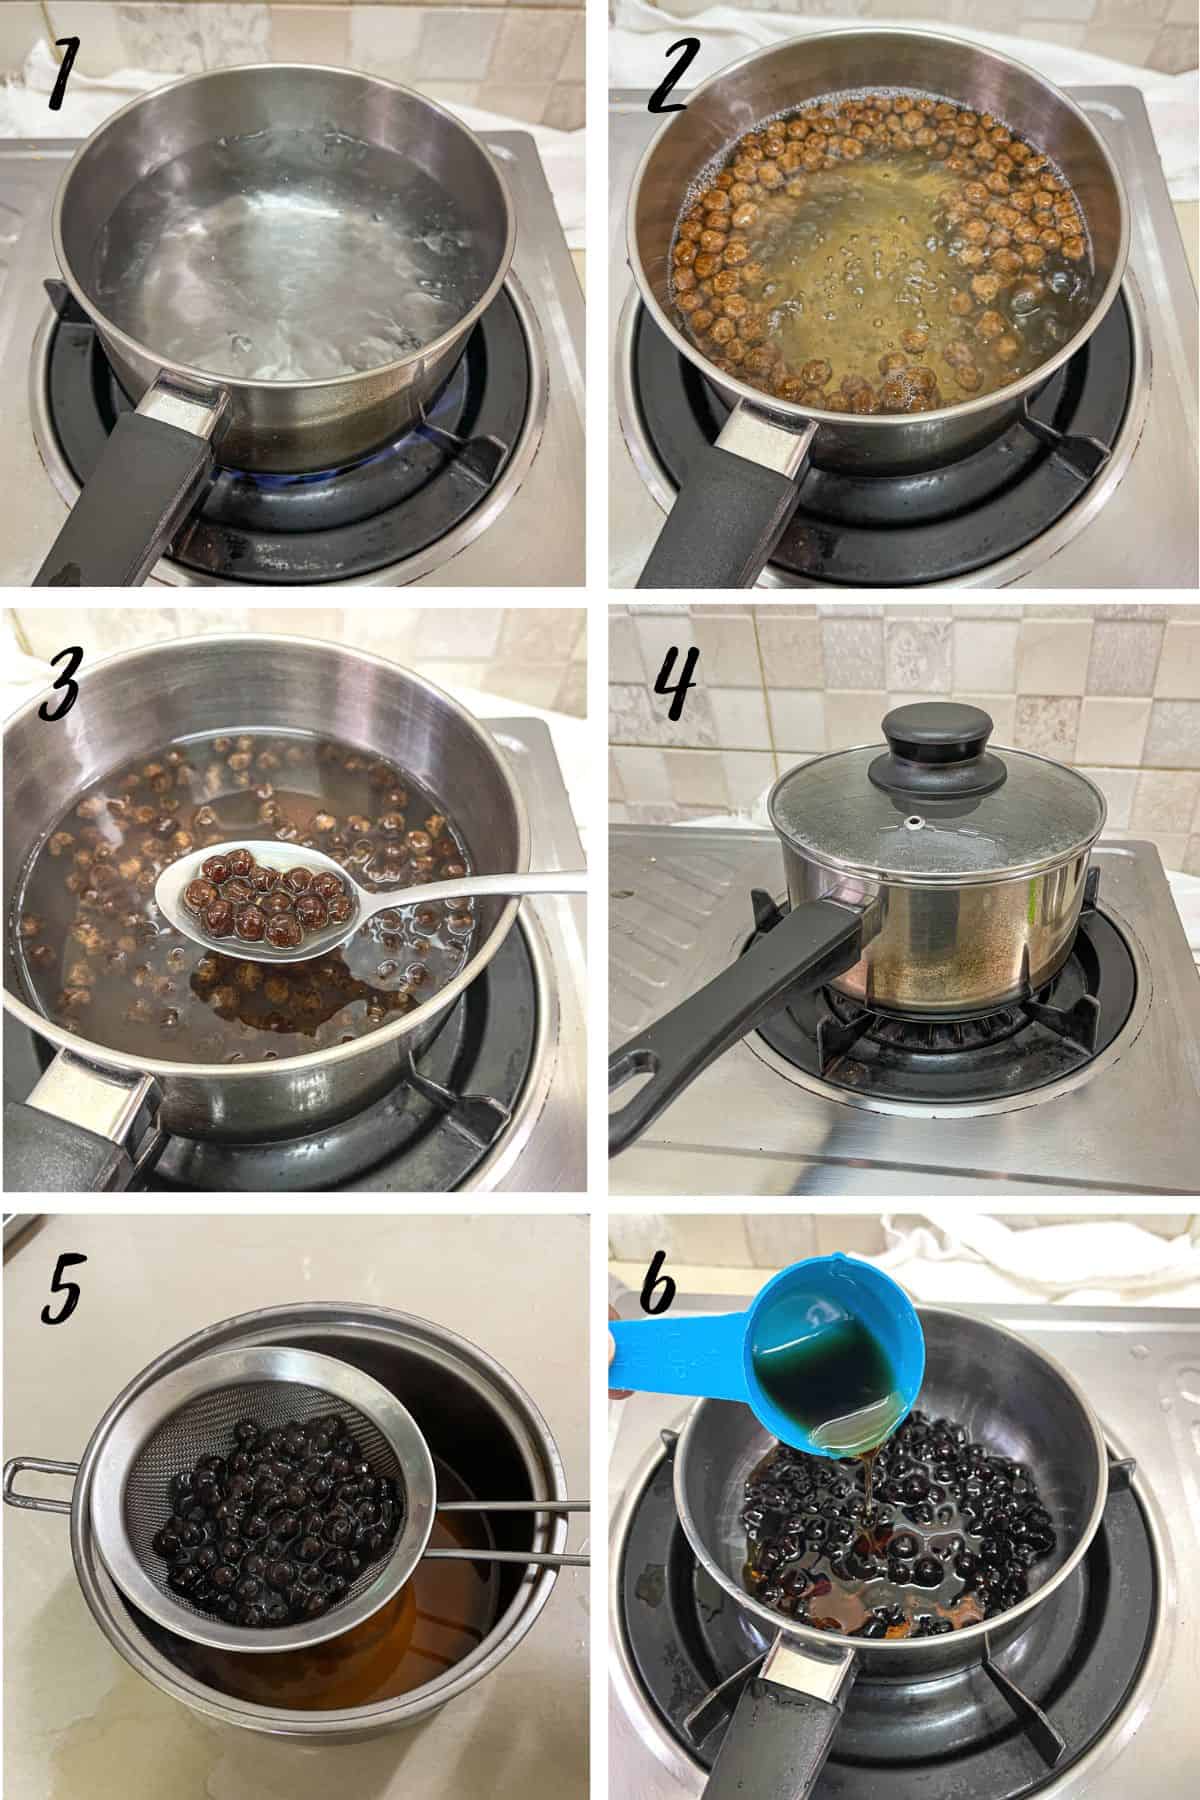 A poster of 6 images showing how to cook boba pearls in brown sugar syrup.